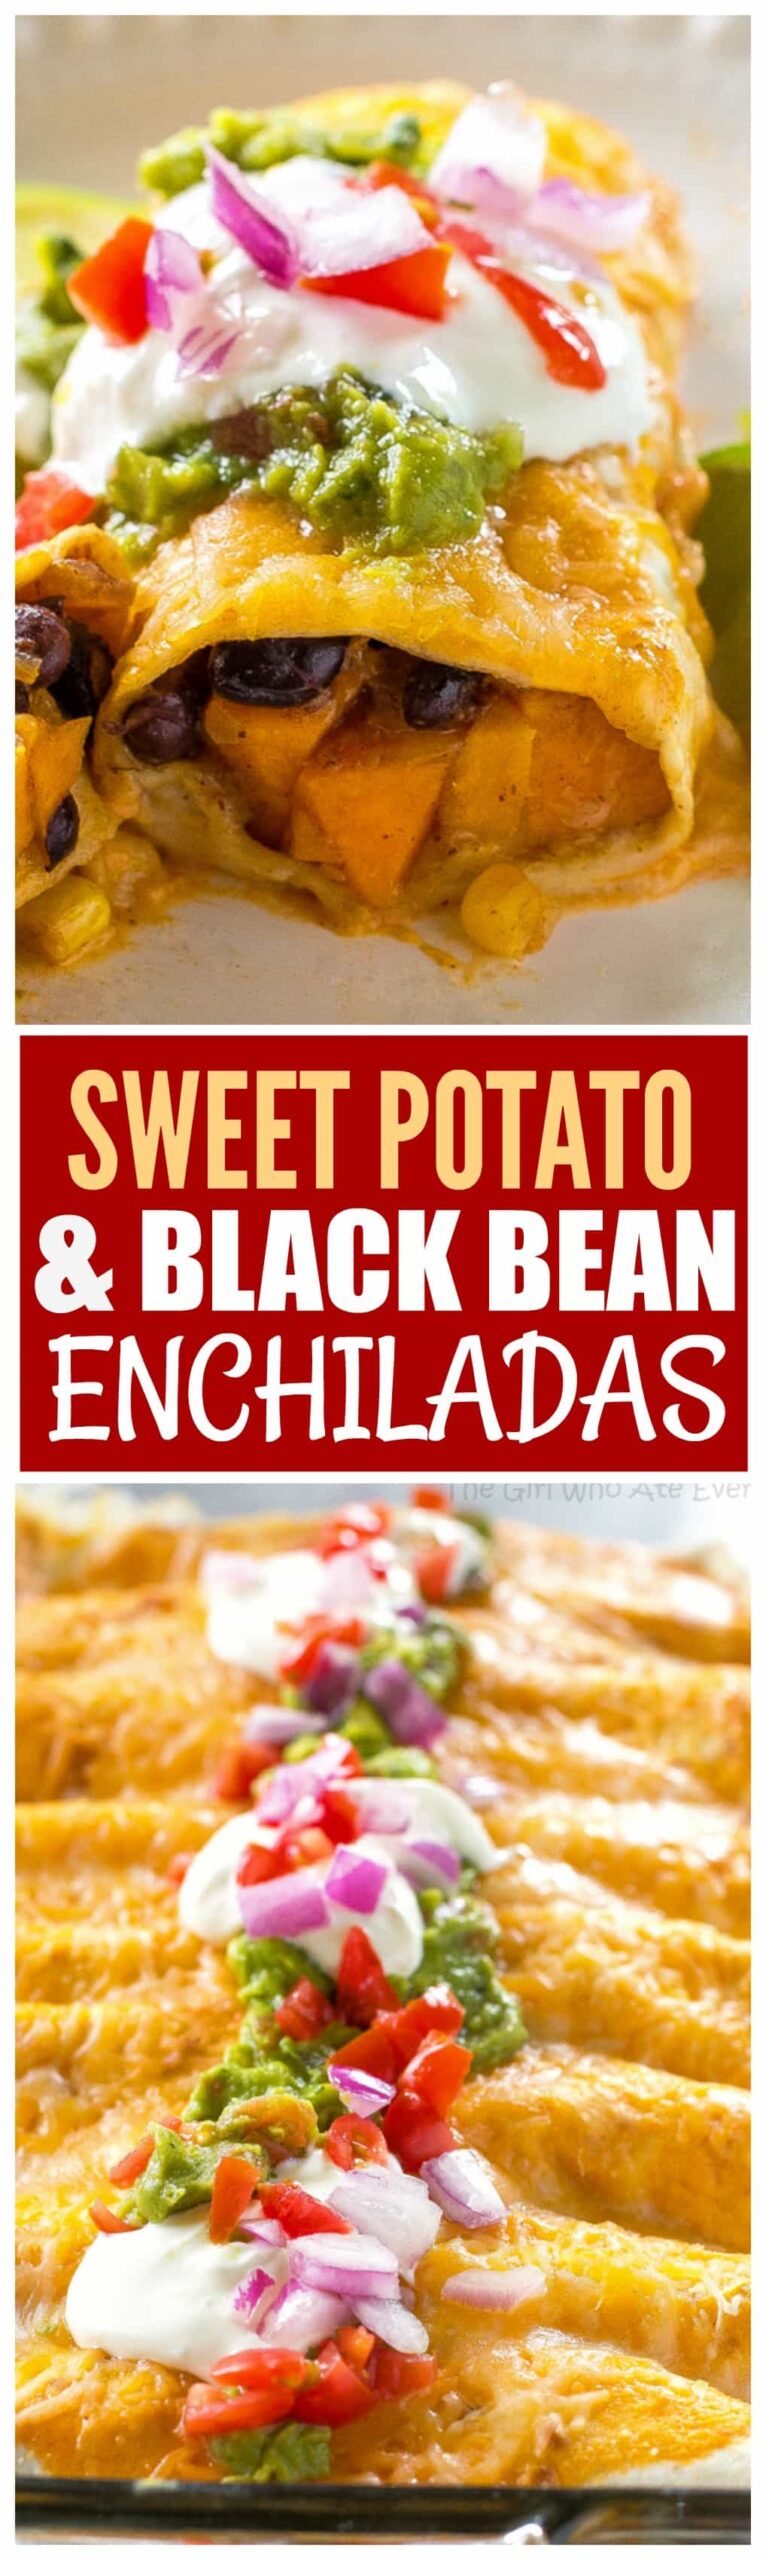 Sweet Potato and Black Bean Enchiladas - a vegetarian Mexican dinner that has the perfect amount of spice and flavor. This is a great freezer meal! #sweet #potato #black #bean #enchiladas #mexican #dinner